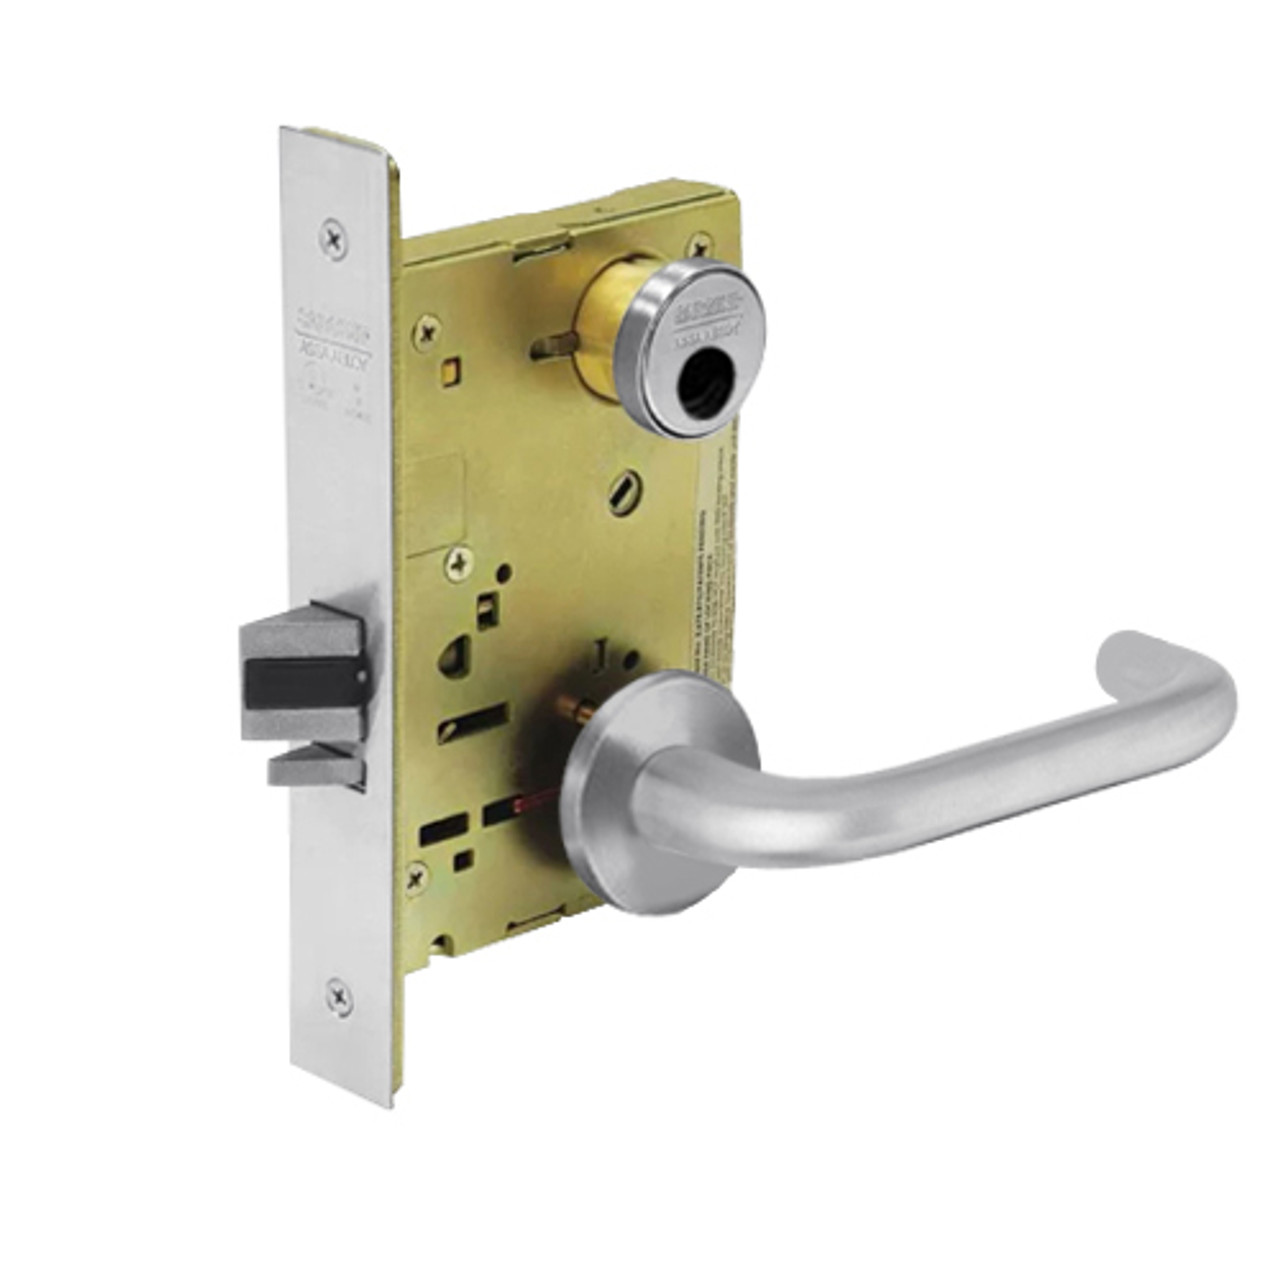 LC-8204-LNJ-26 Sargent 8200 Series Storeroom or Closet Mortise Lock with LNJ Lever Trim Less Cylinder in Bright Chrome